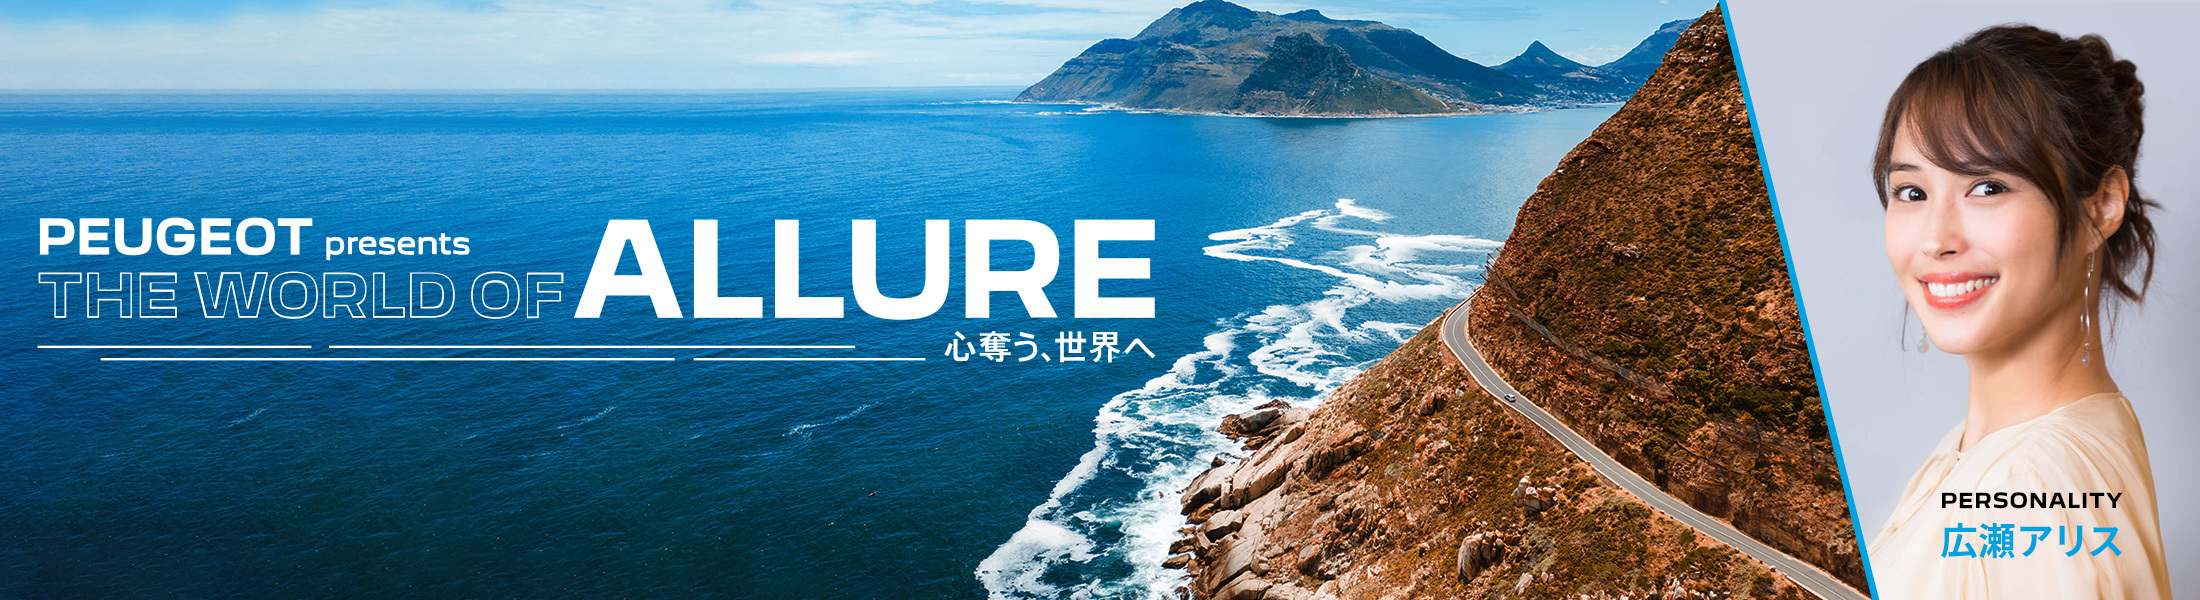 PEUGEOT presents THE WORLD OF ALLURE～心奪う、世界へ～